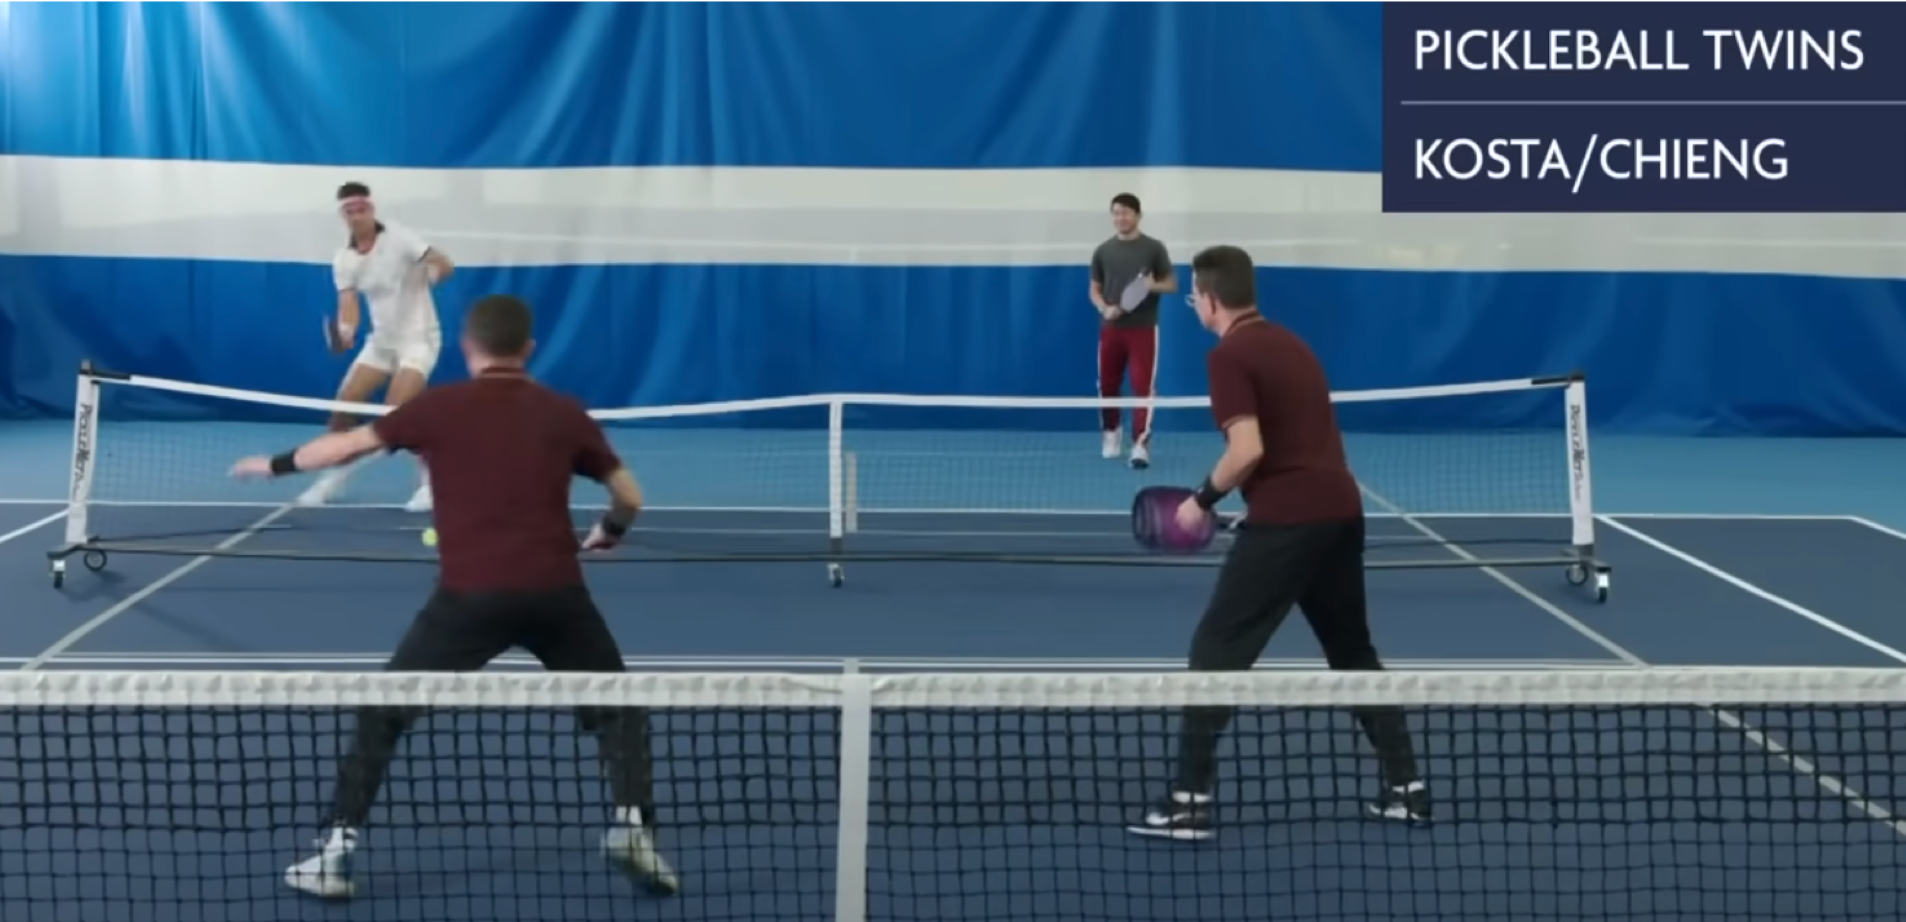 This “The Daily Show” Spoof Further Proves Pickleball Has Made the Mainstream